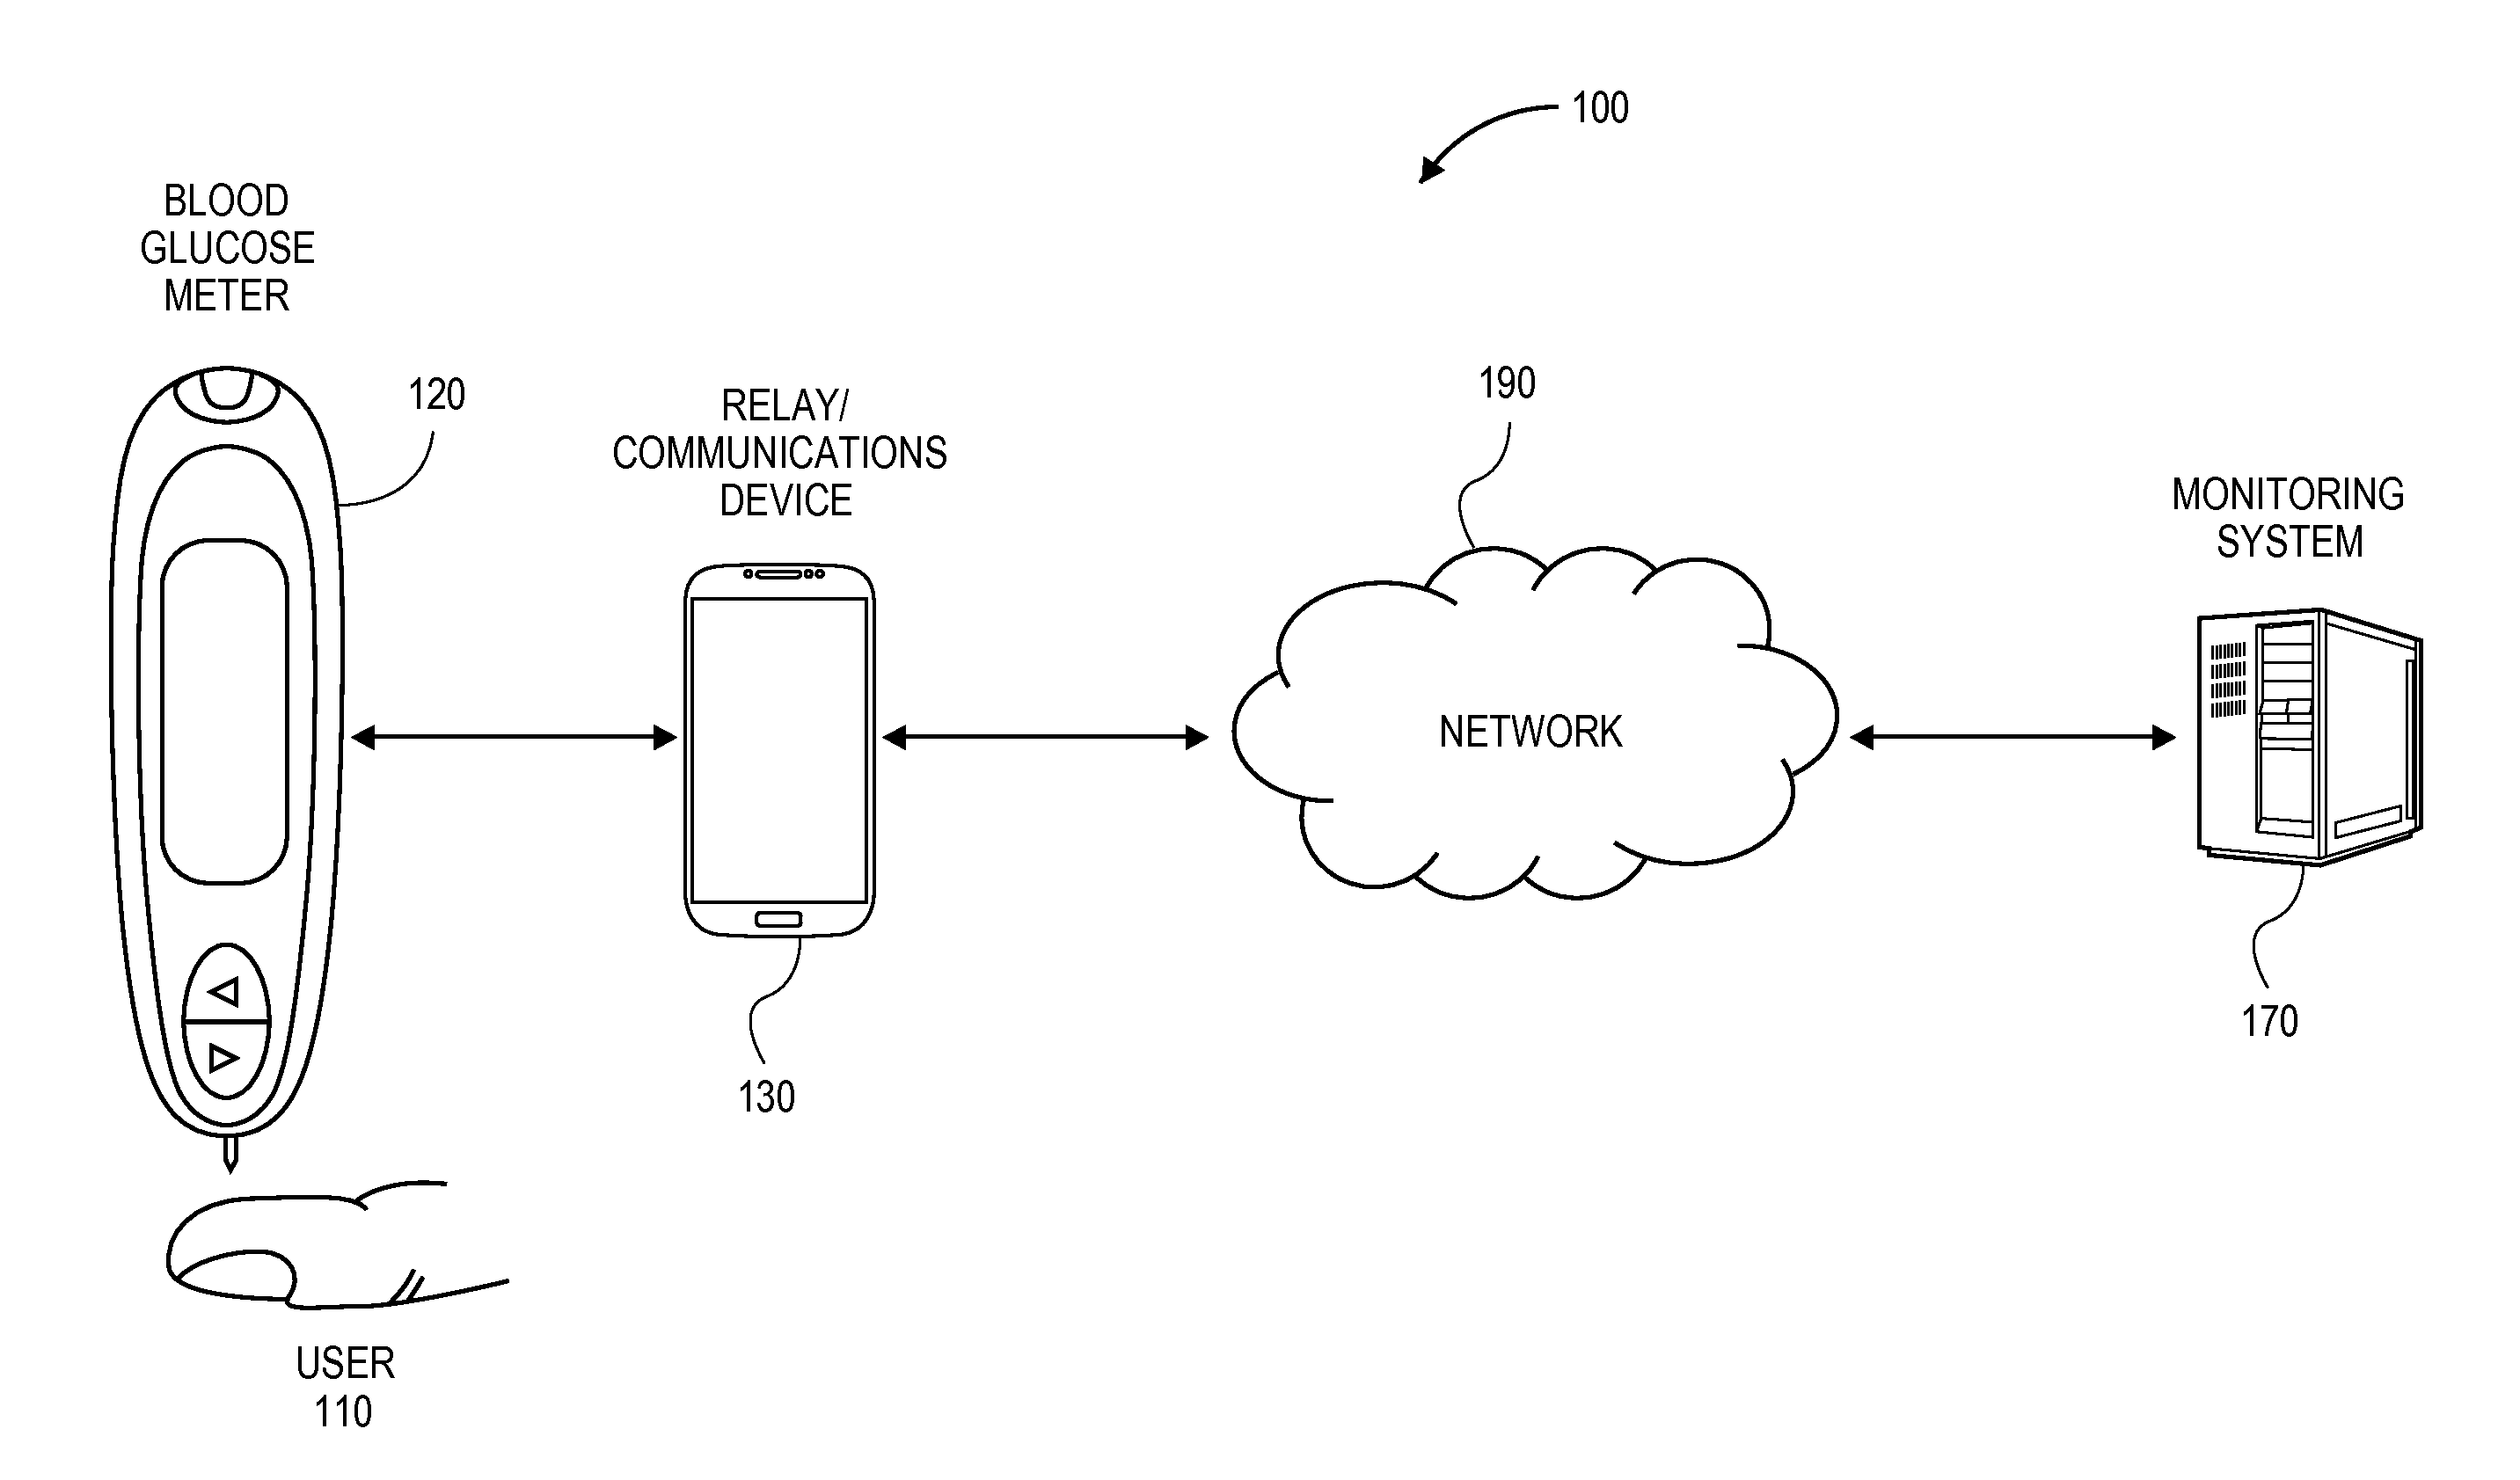 Computer-Based Monitoring of Blood Glucose Levels